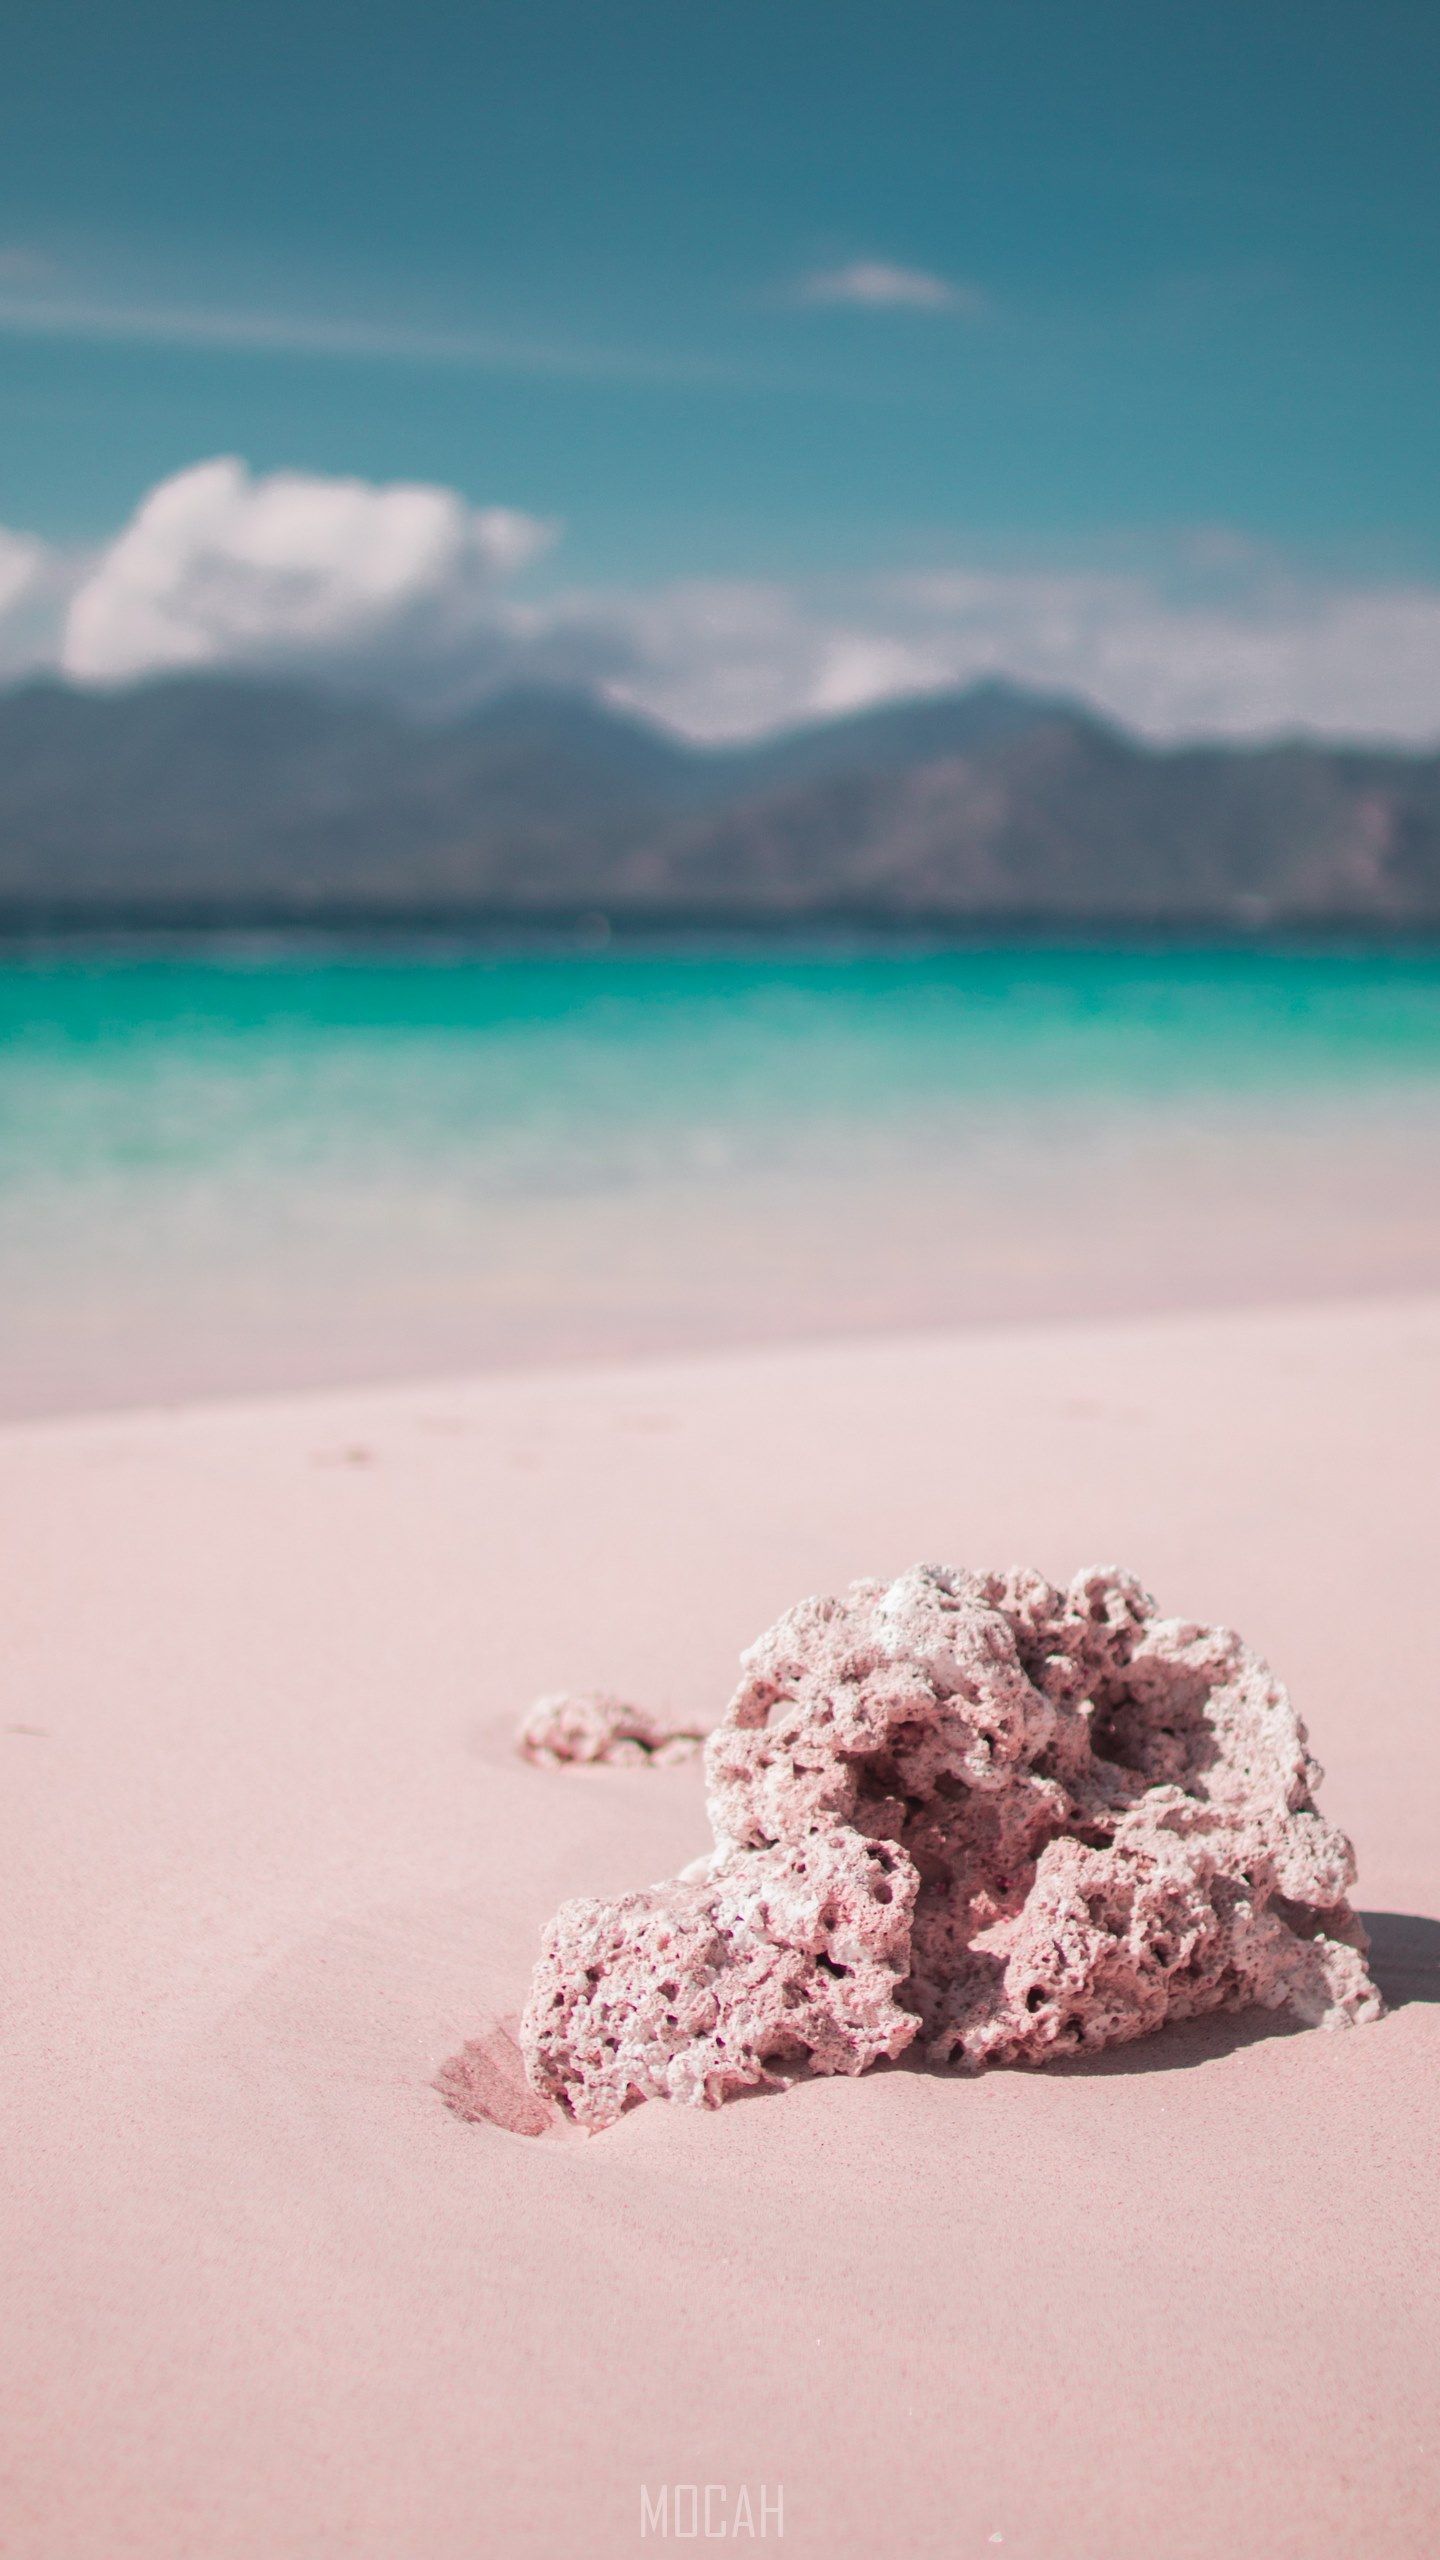 A rock on the beach in front of mountains - Coral